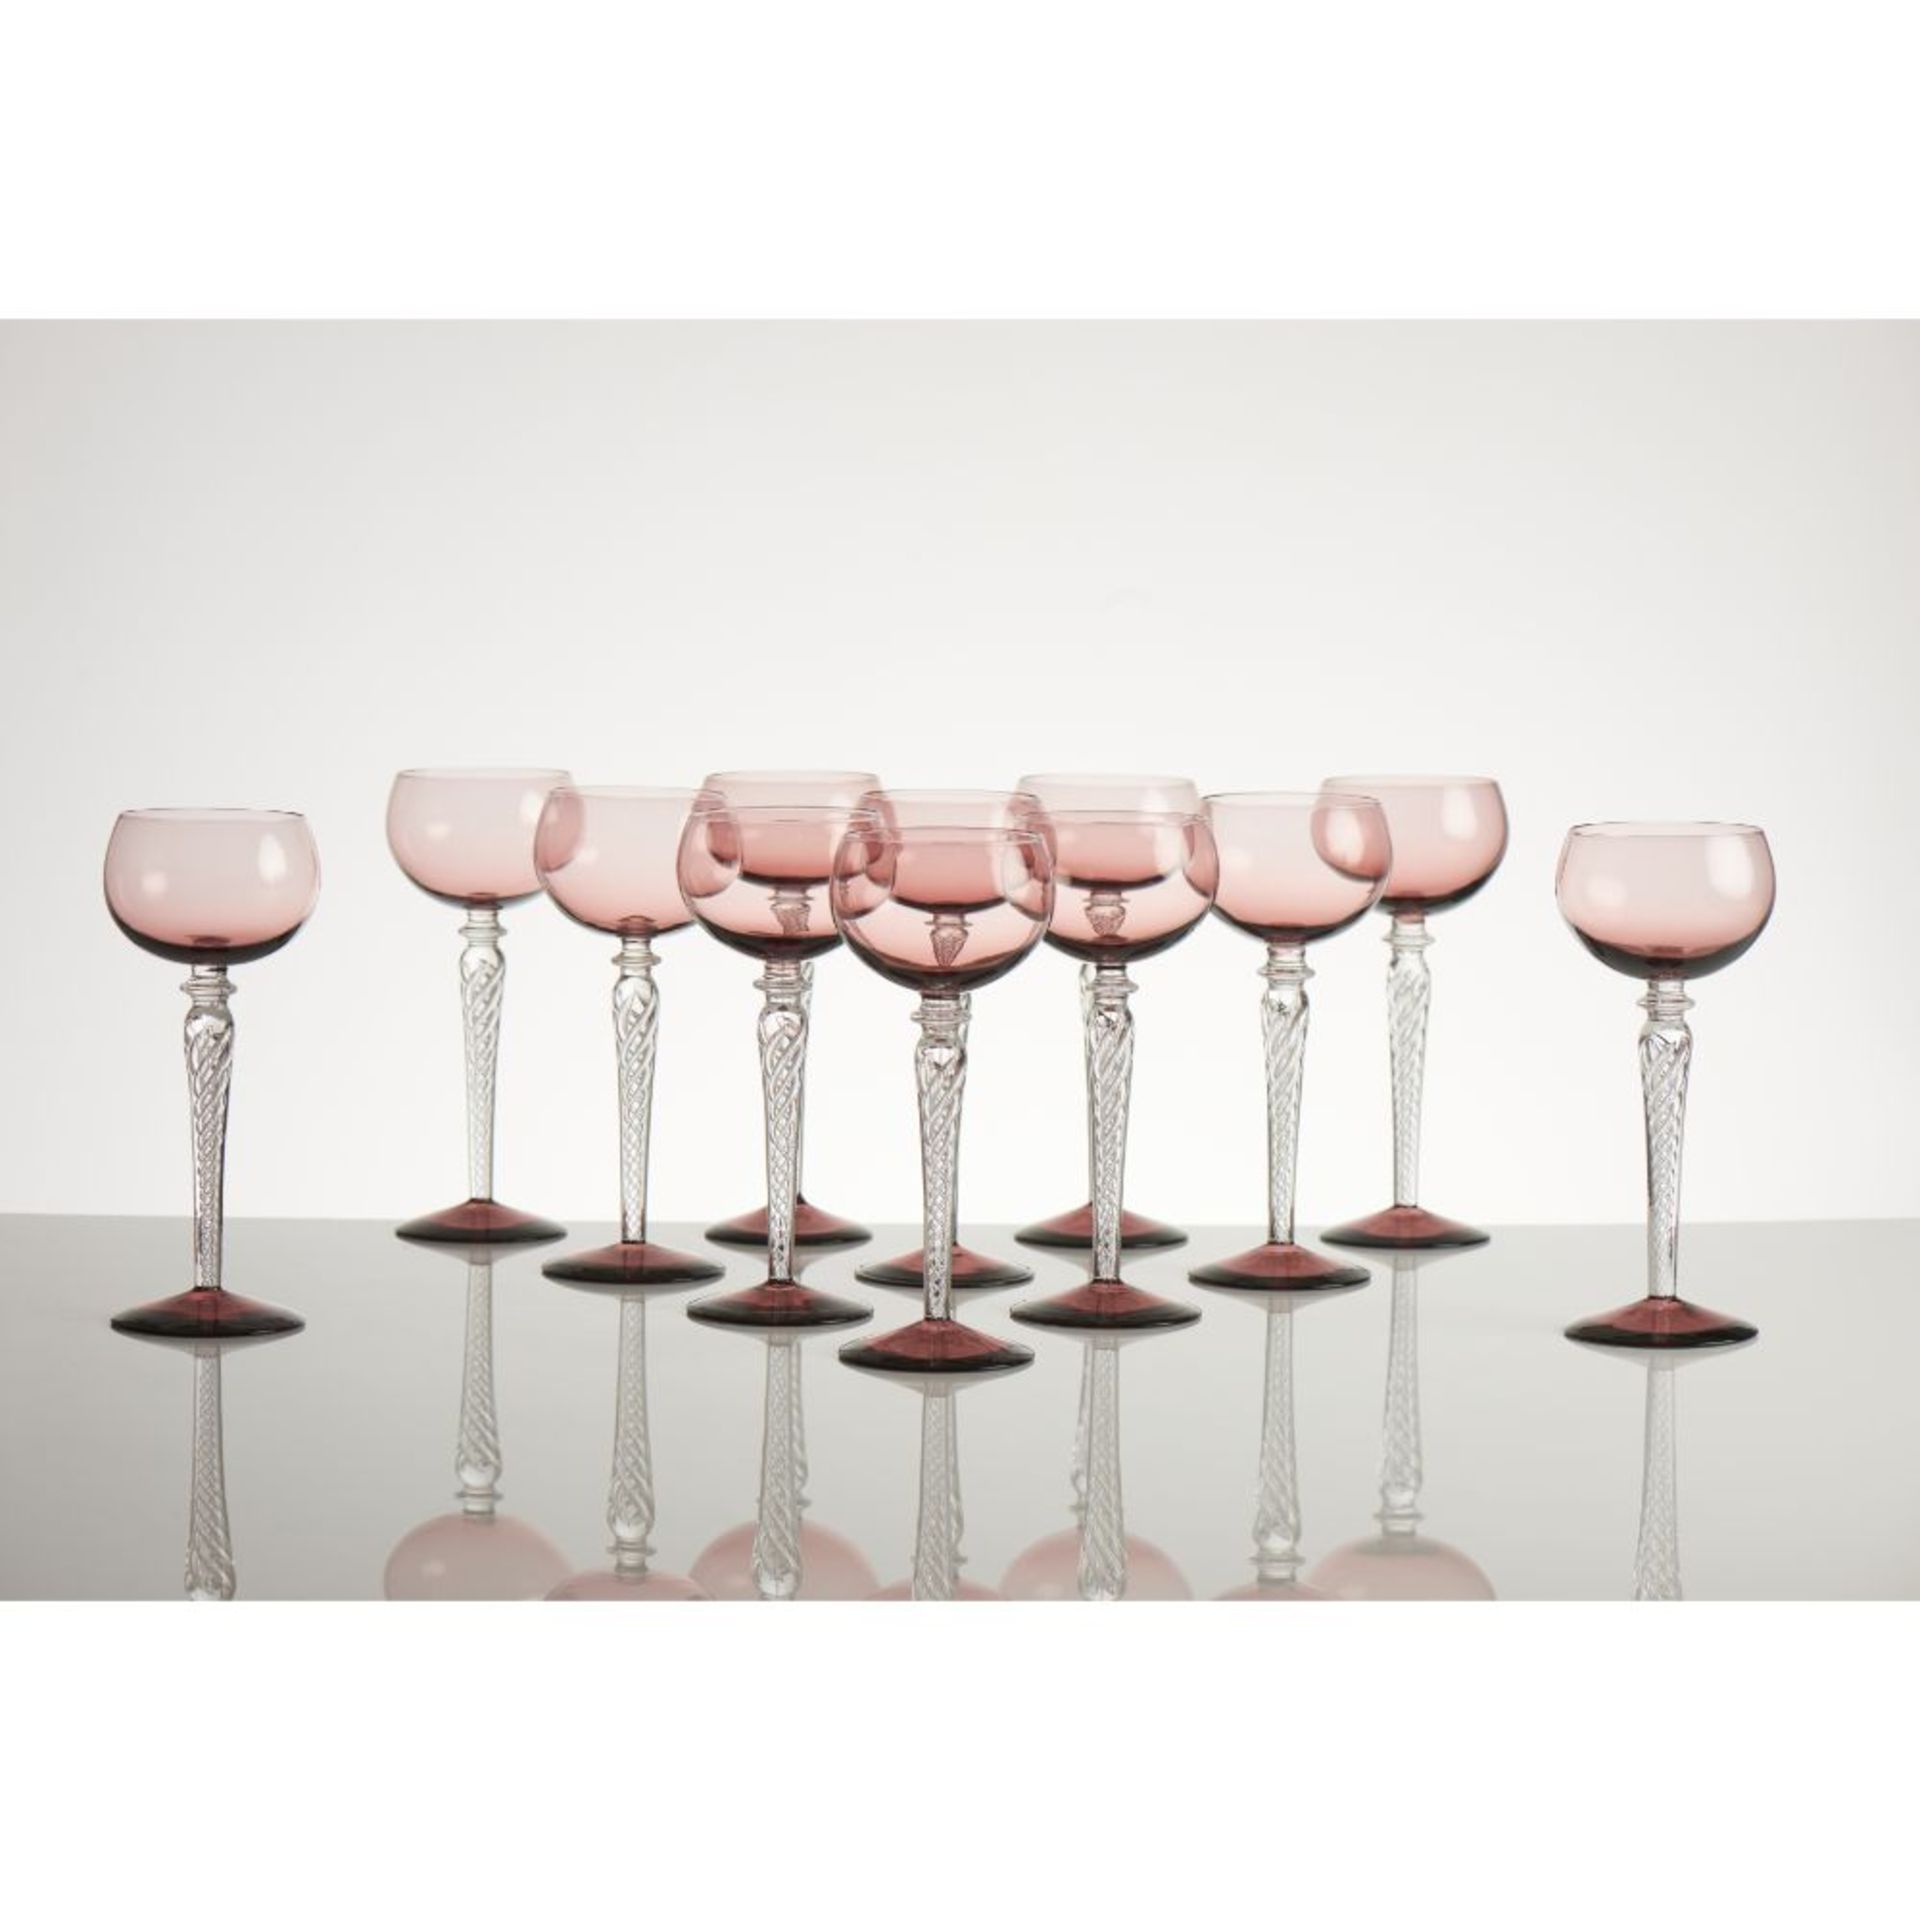 A set of drinking glasses for 12